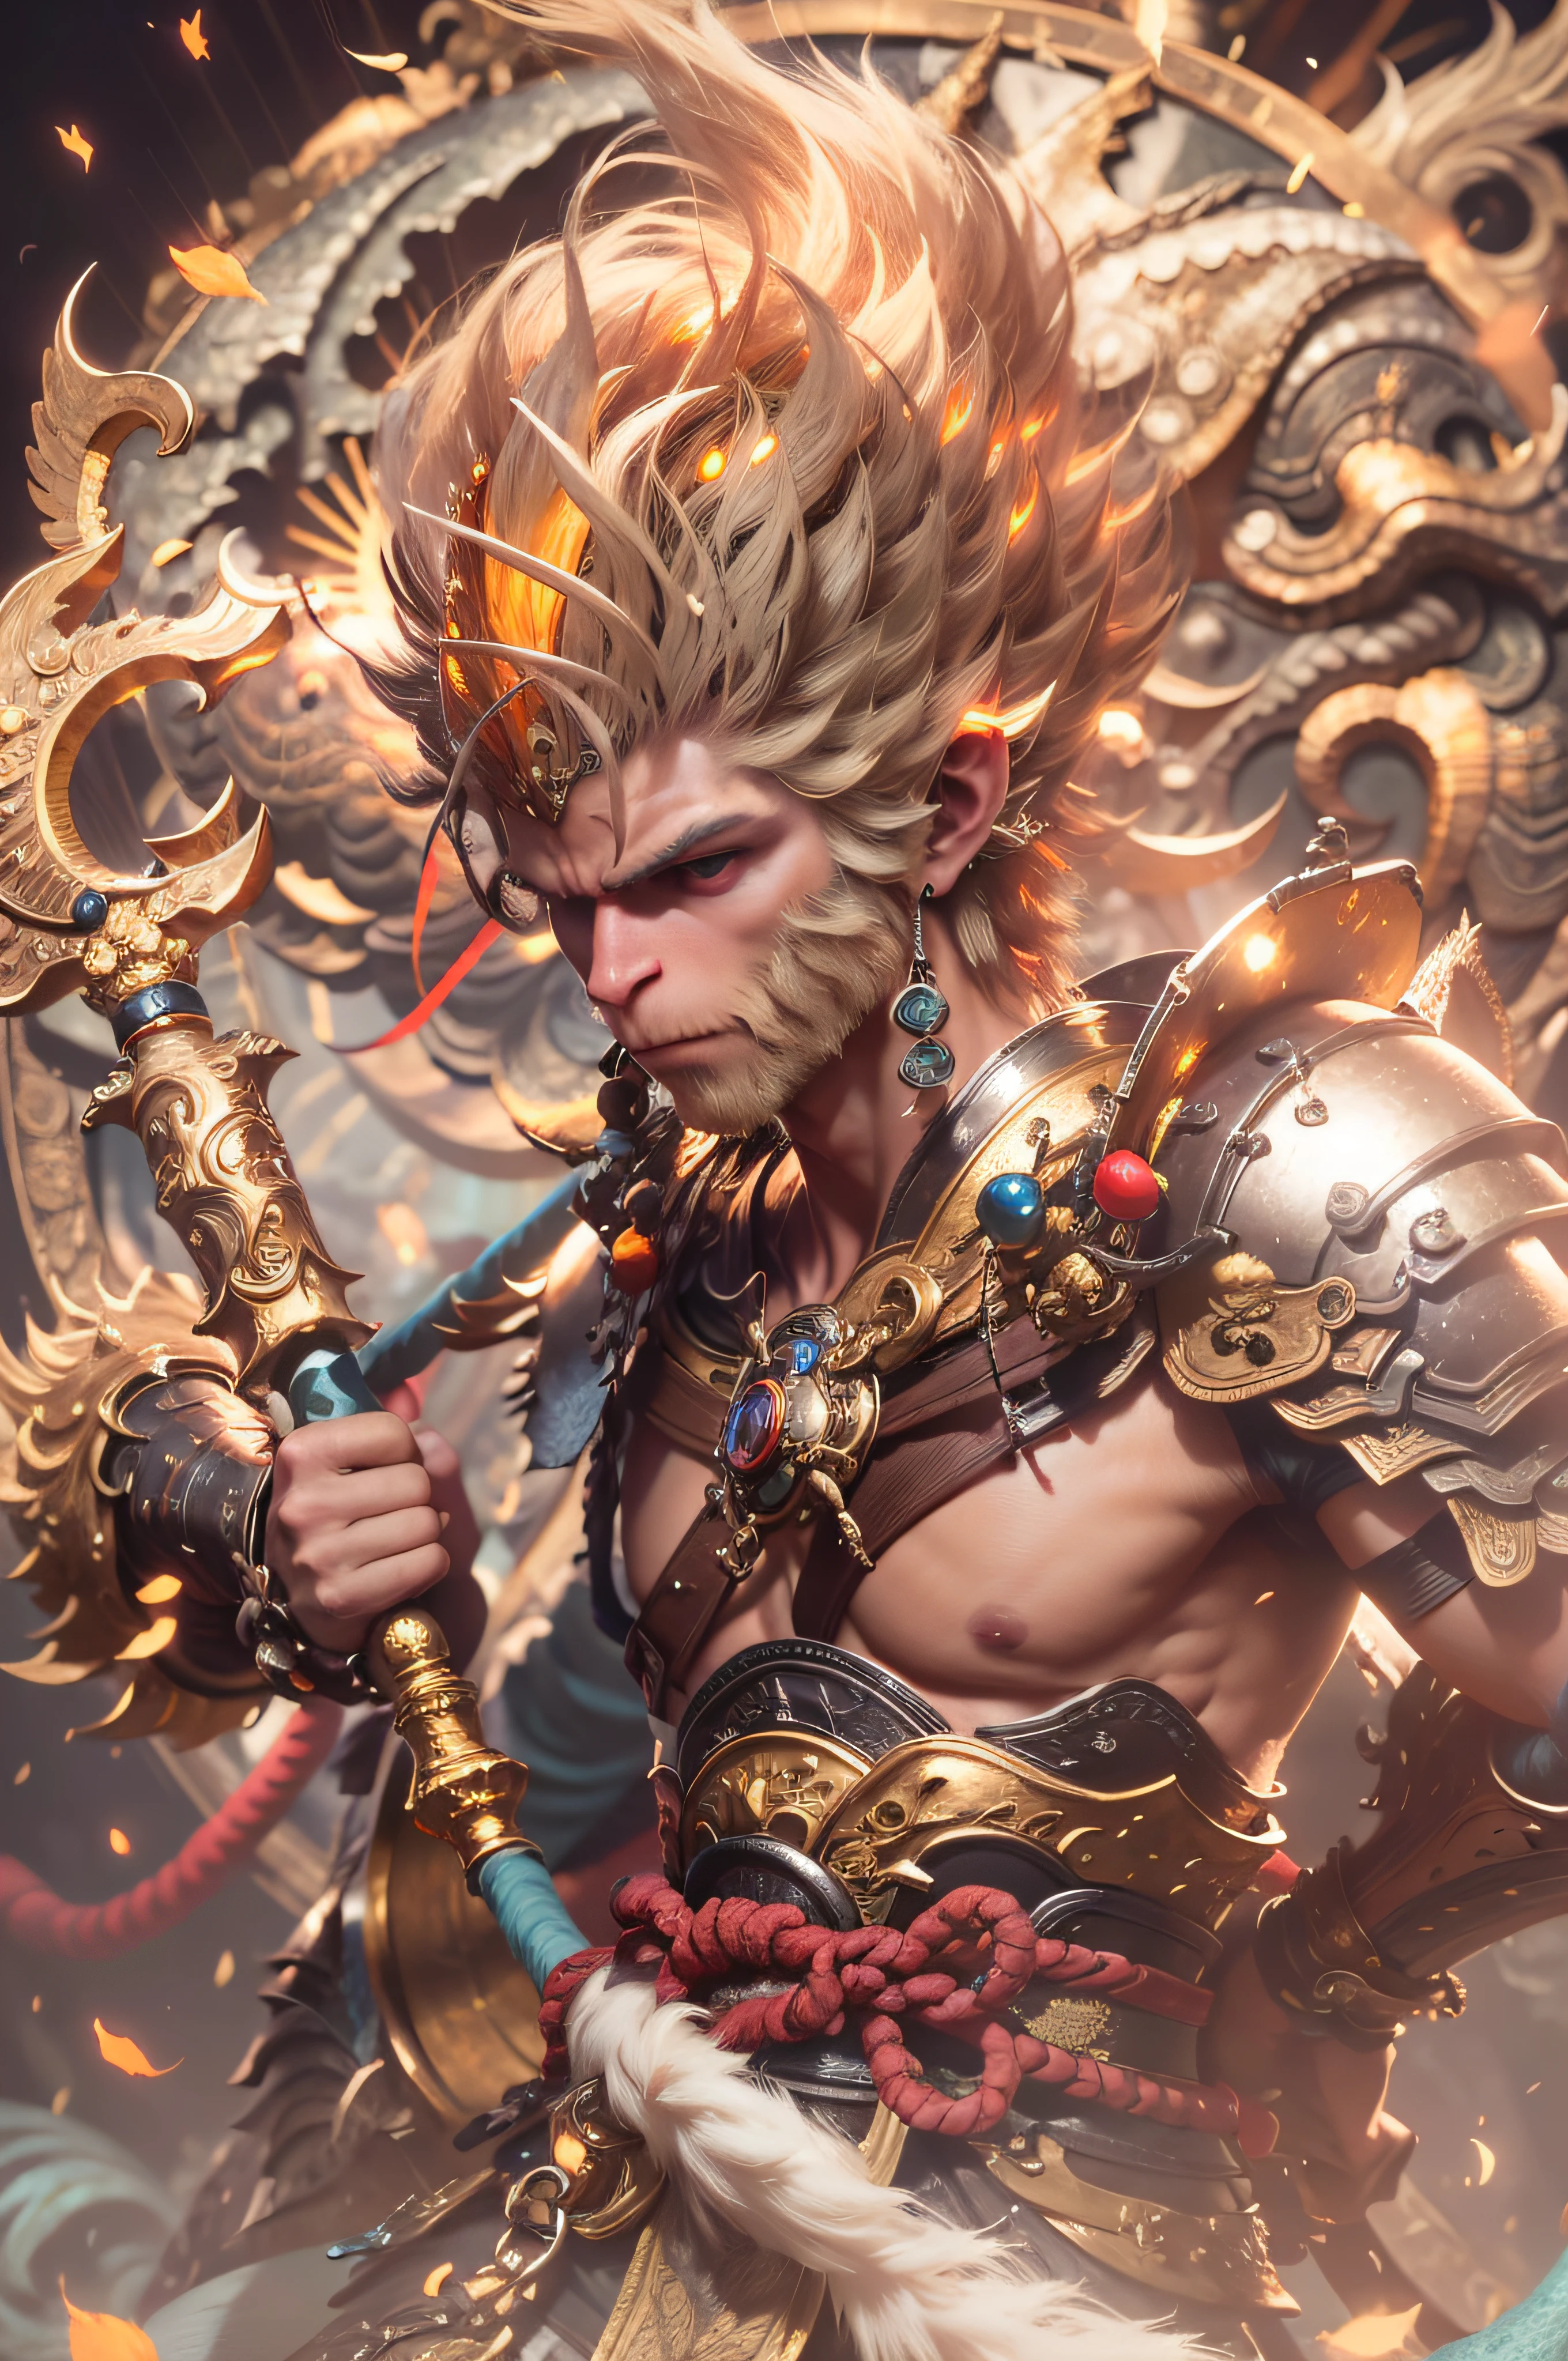 (masterpiece, best details), mythical creature, sun wukong, golden hair, wear golden circlet, wear traditional garb armor, holding staff resting on his shoulder